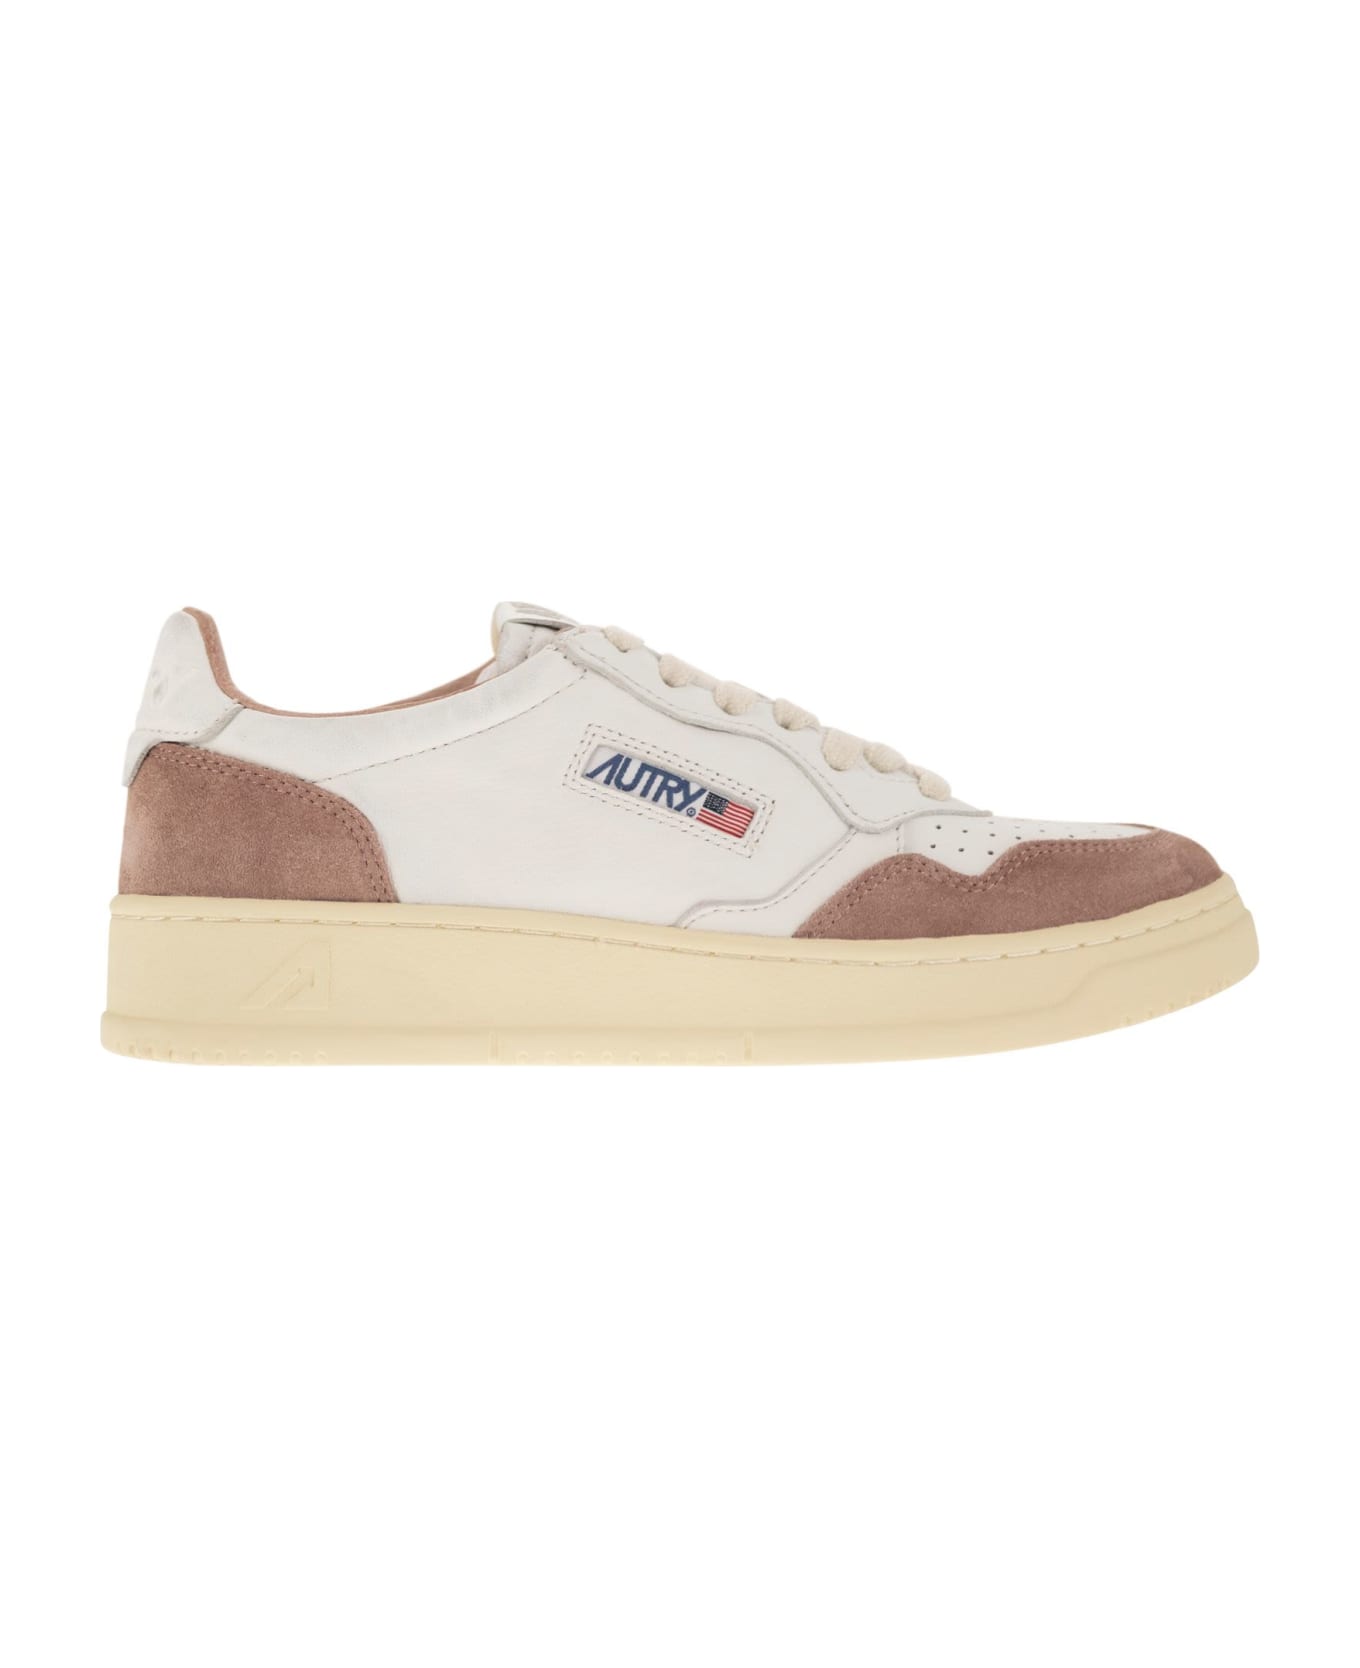 Autry Medalist Low Sneakers - White/brown